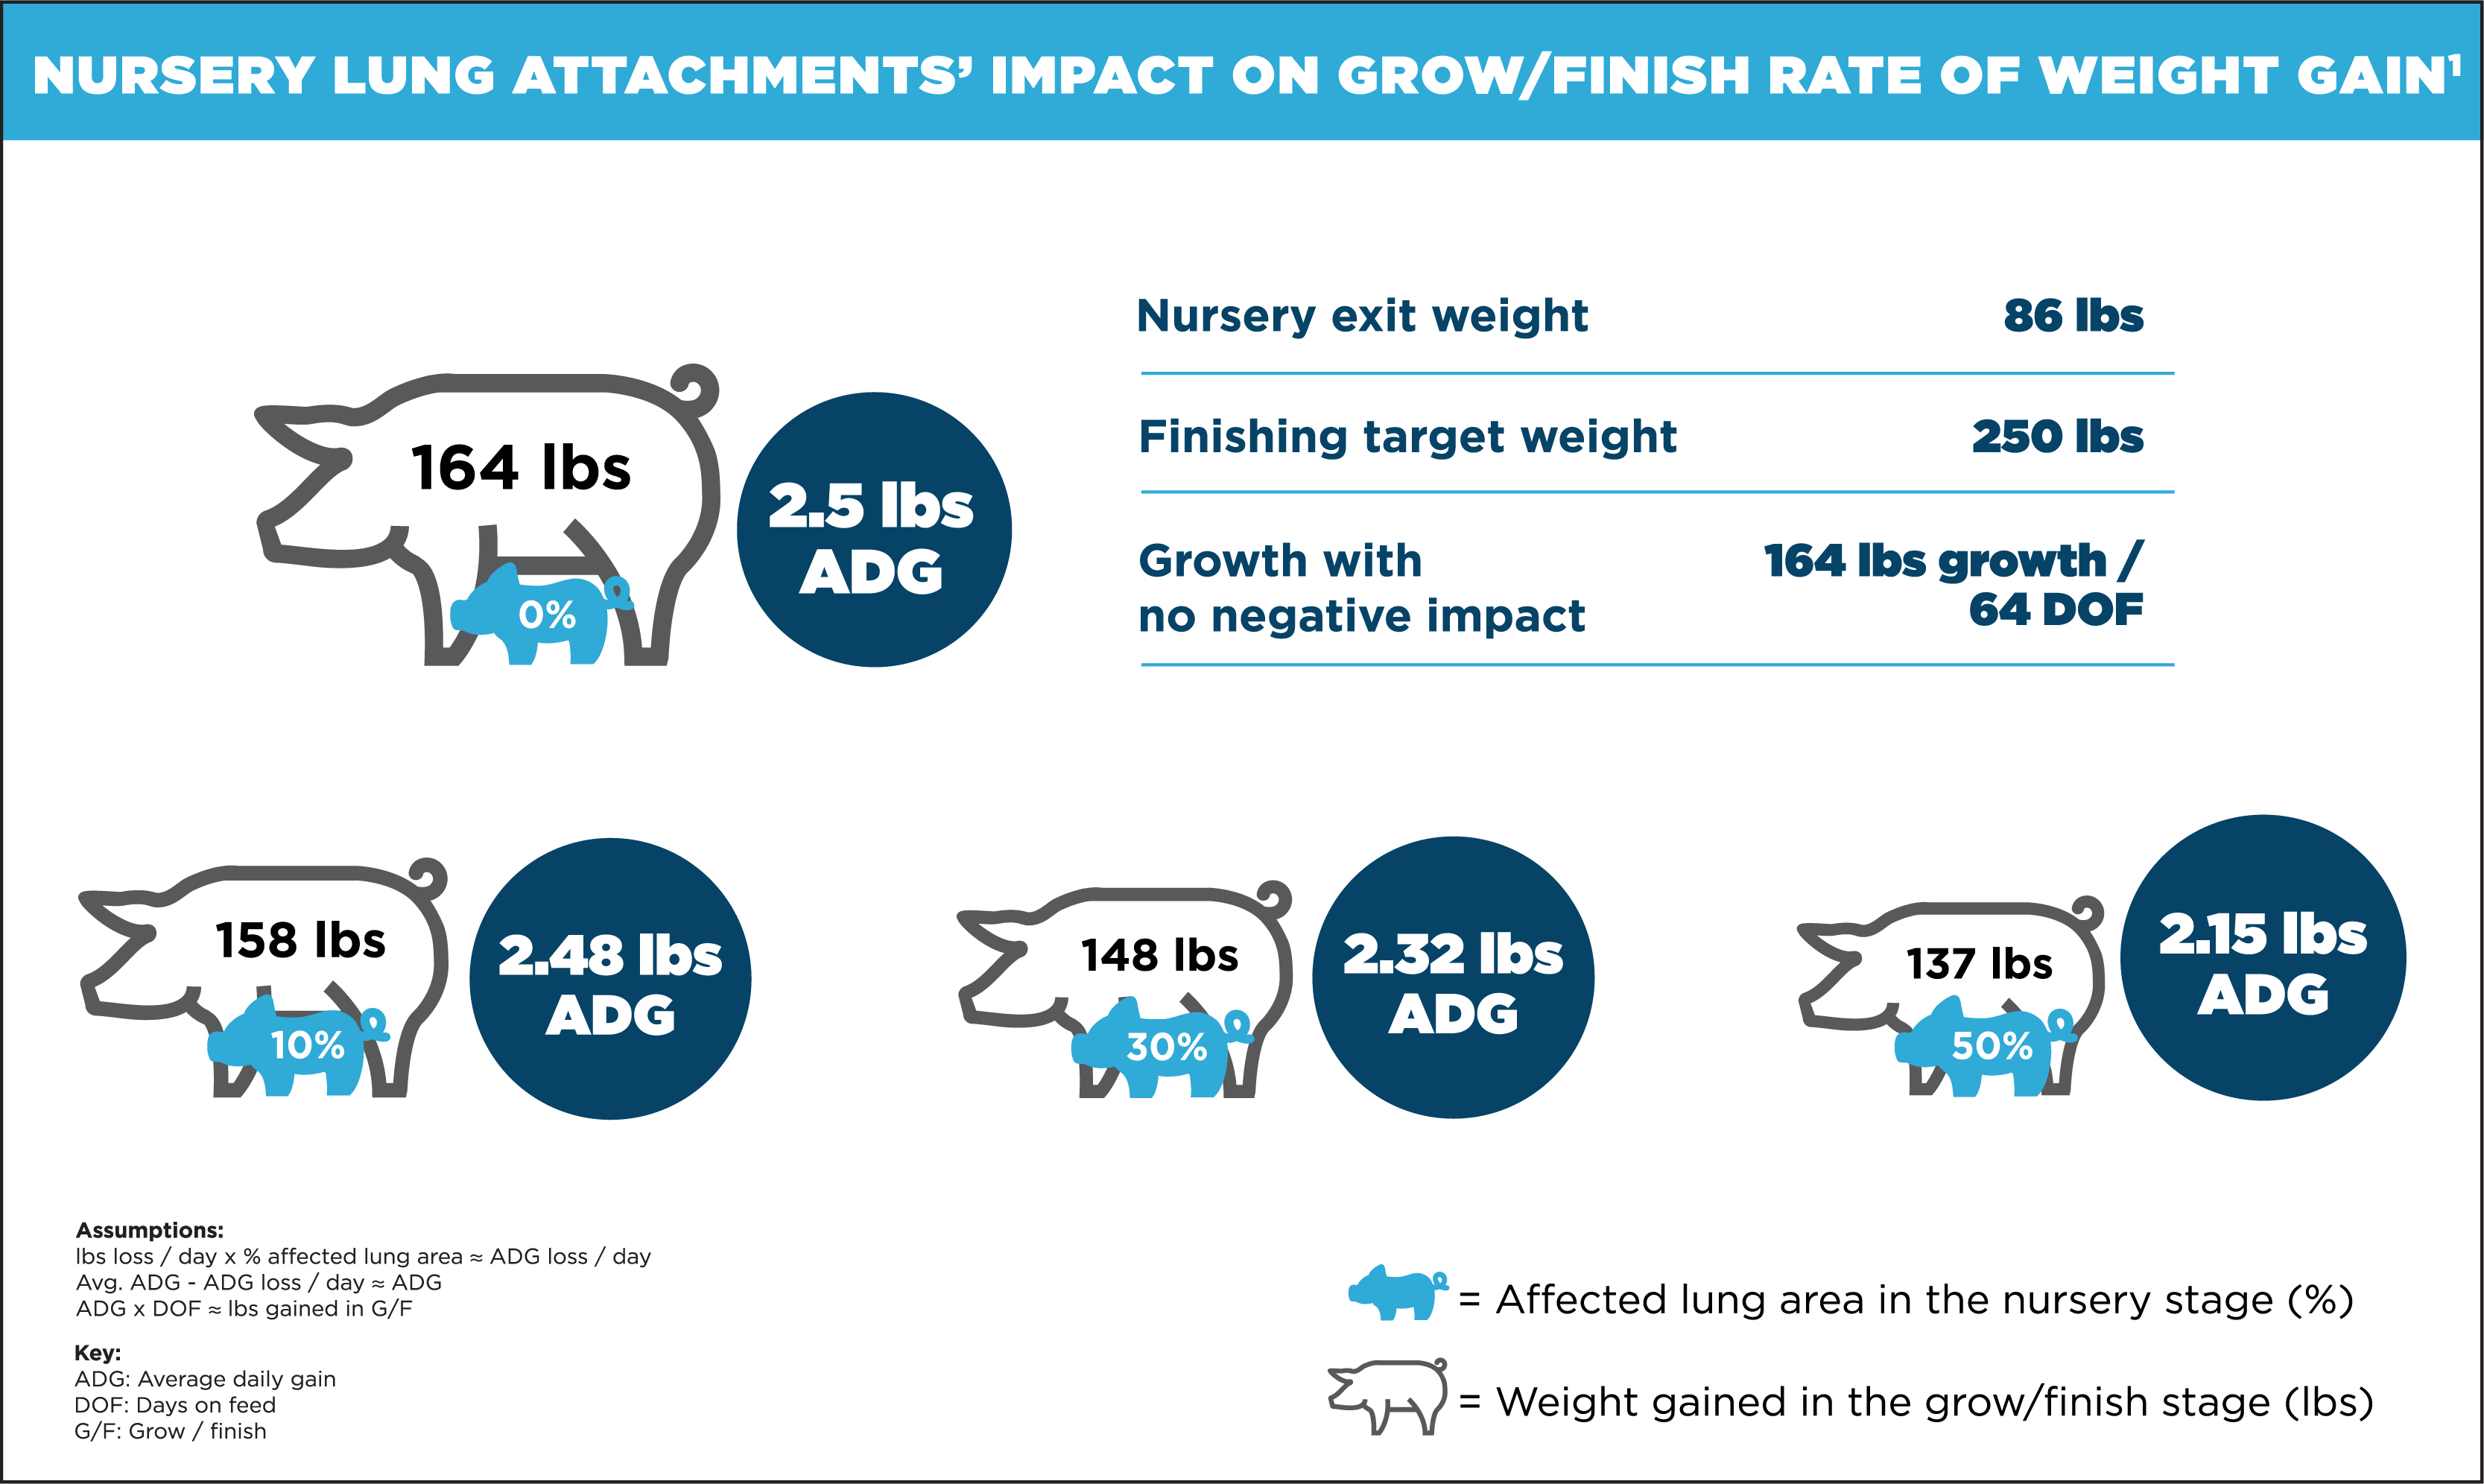 Chart showing Nursery Lung Attachment's Impact on Grow/Finish Rate of Weight Gain